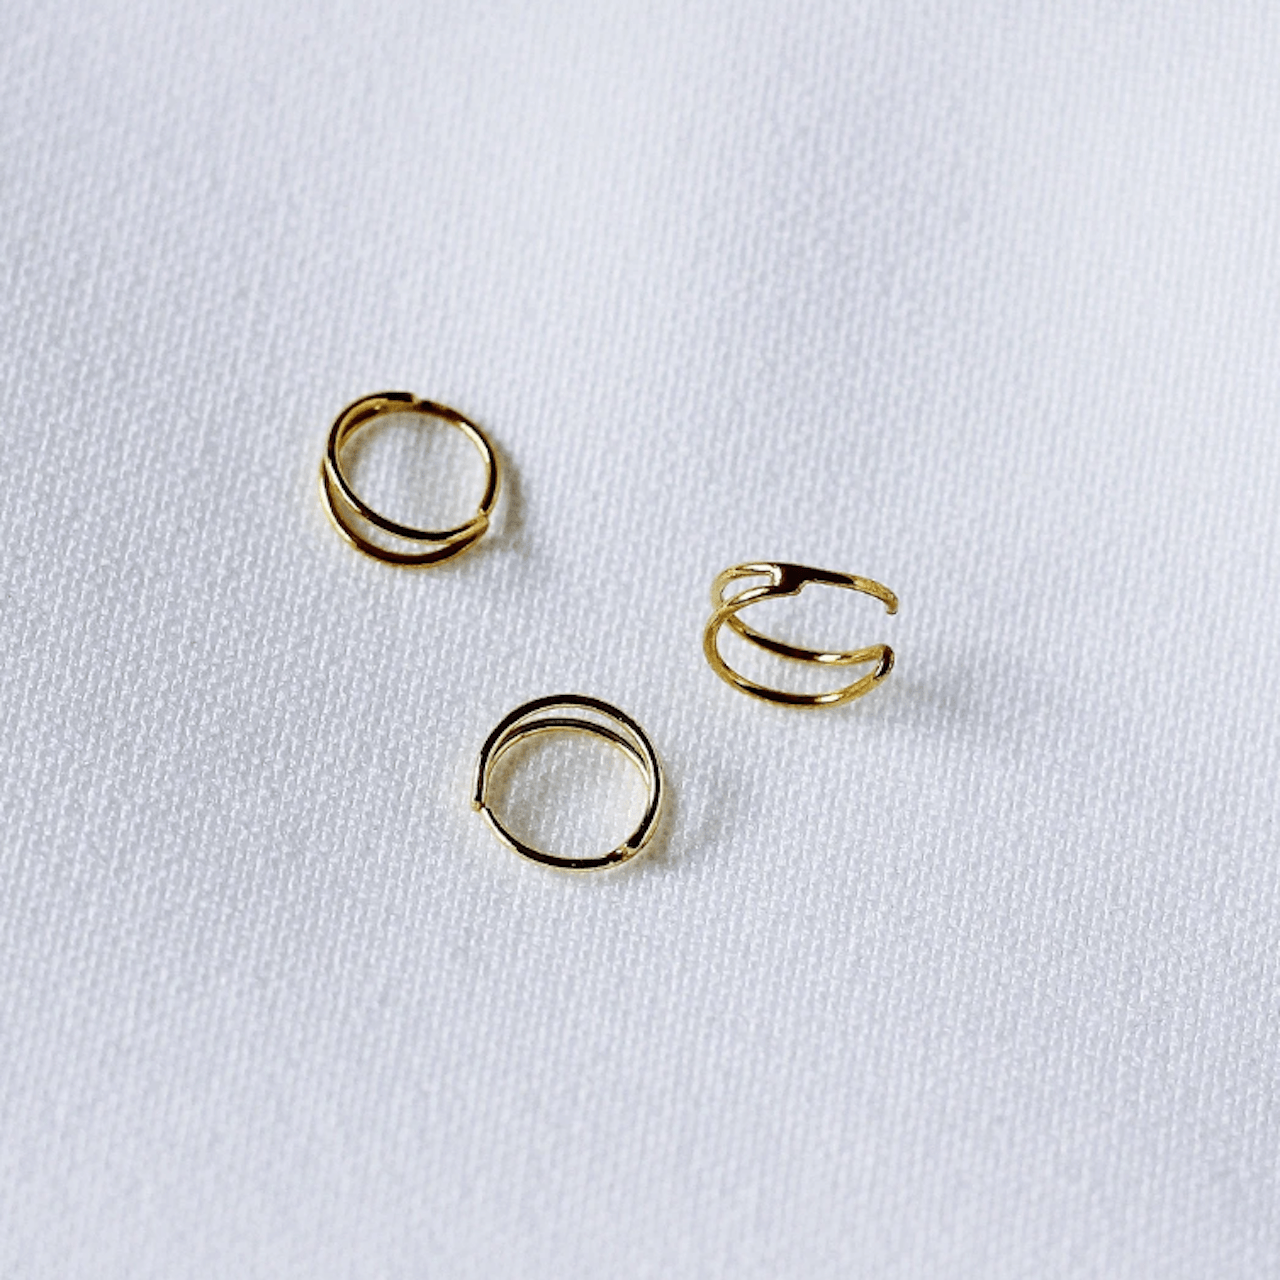 Double Hoop Nose Ring 14k Gold - TinyBox Jewelry